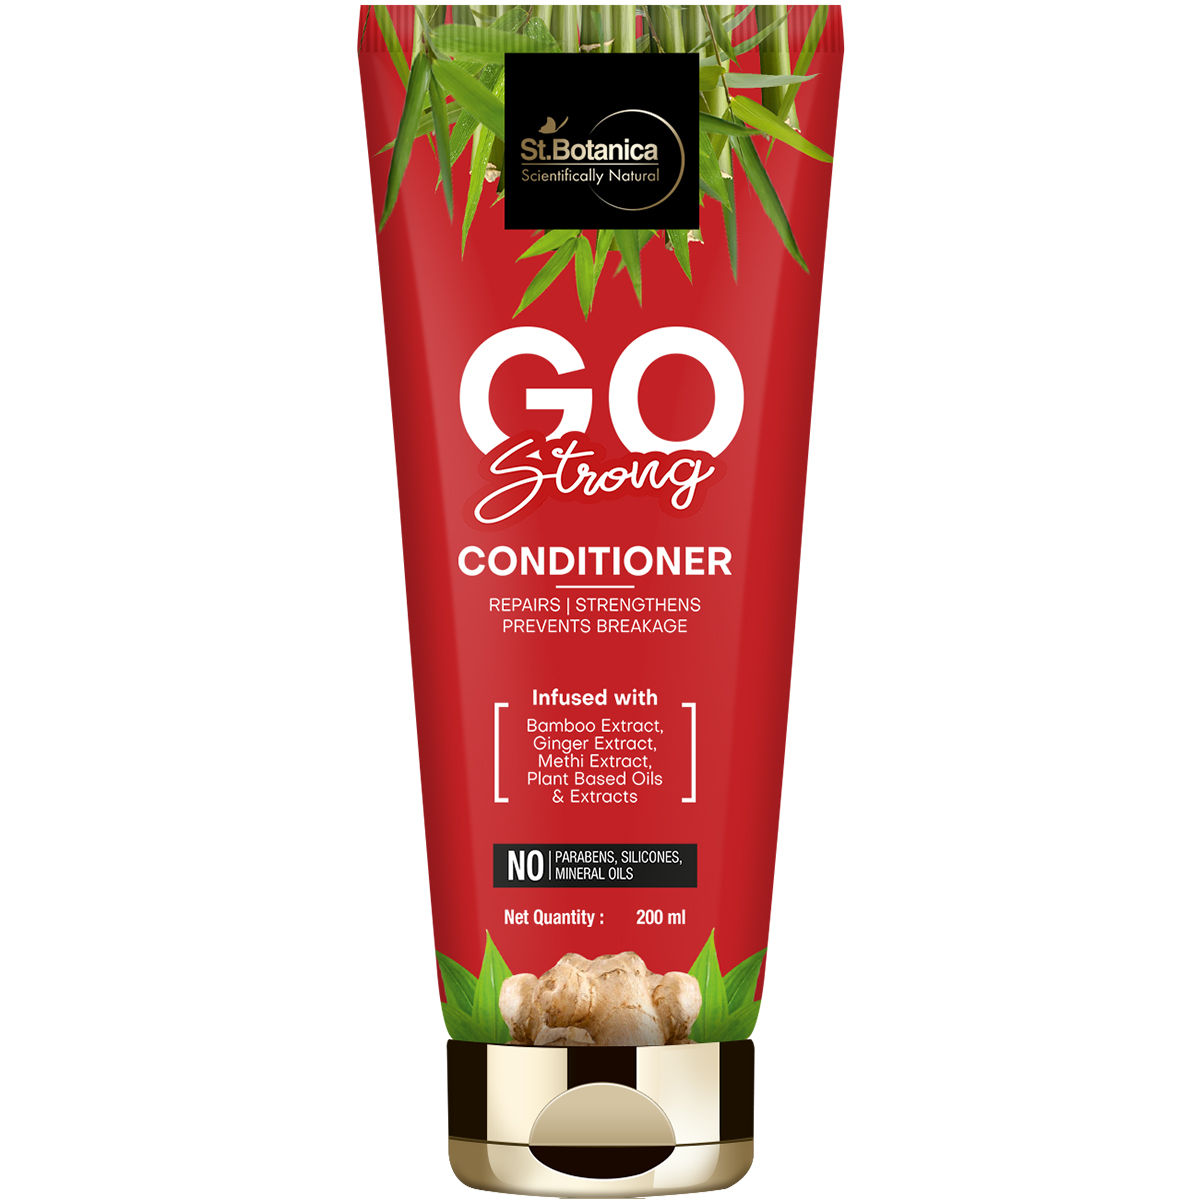 StBotanica GO Strong Hair Conditioner - With Bamboo Extract, Ginger Extract, No Silicone